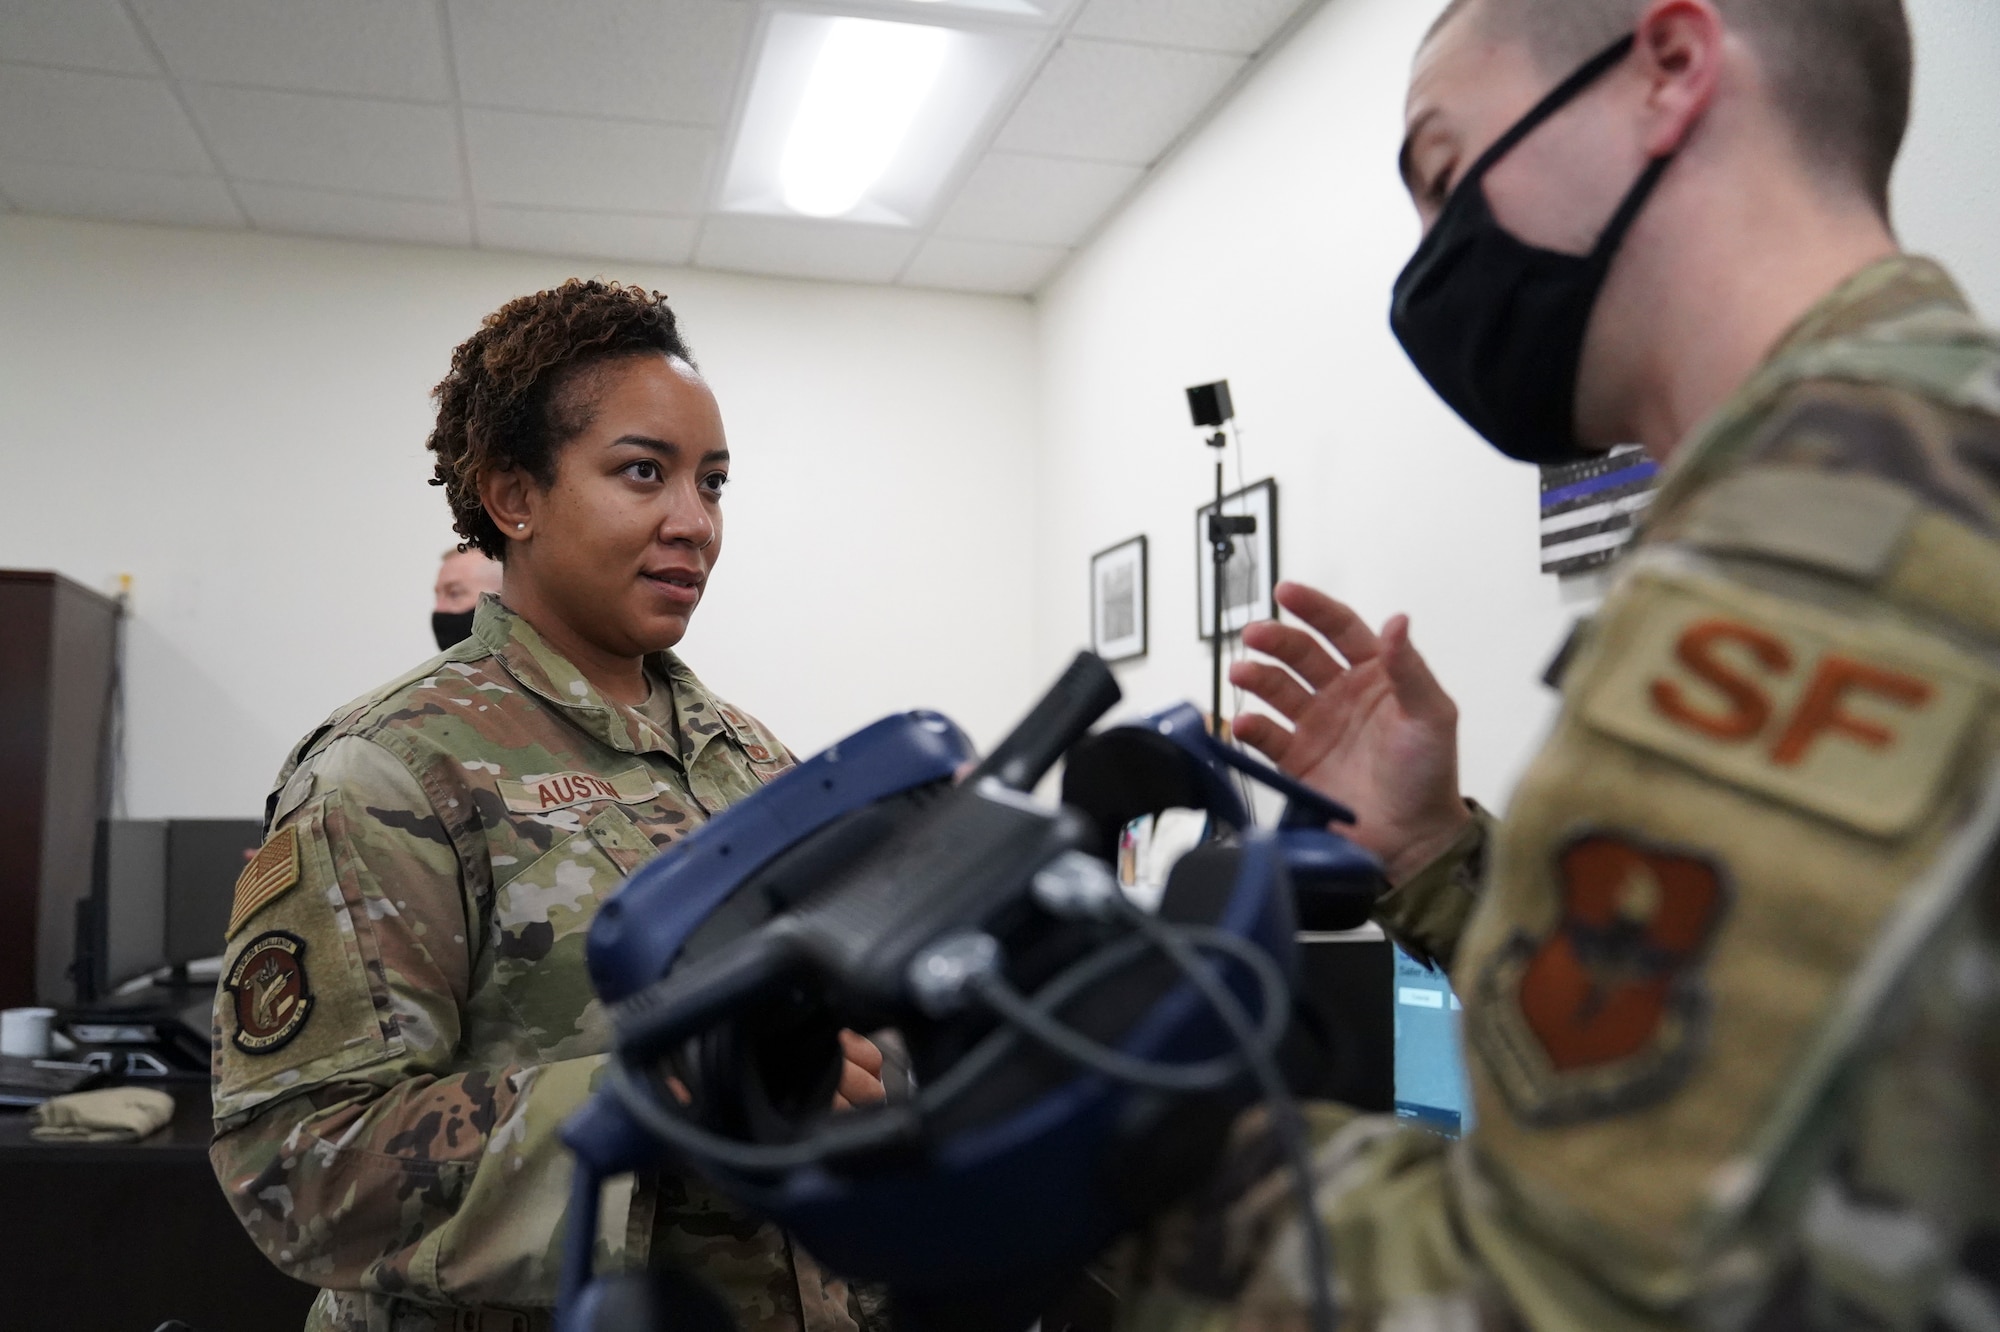 U.S. Air Force Lt. Tenisha Austin, 81st Contracting Squadron infrustructure flight commander, prepares to use a virtual-reality system inside the security forces building at Keesler Air Force Base, Missisippi, July 15, 2021. The 81st CONS is responsible for providing contracting support to the 81st Training Wing, tenant units and other Defense Department missions across the globe. (U.S. Air Force photo by Senior Airman Spencer Tobler)